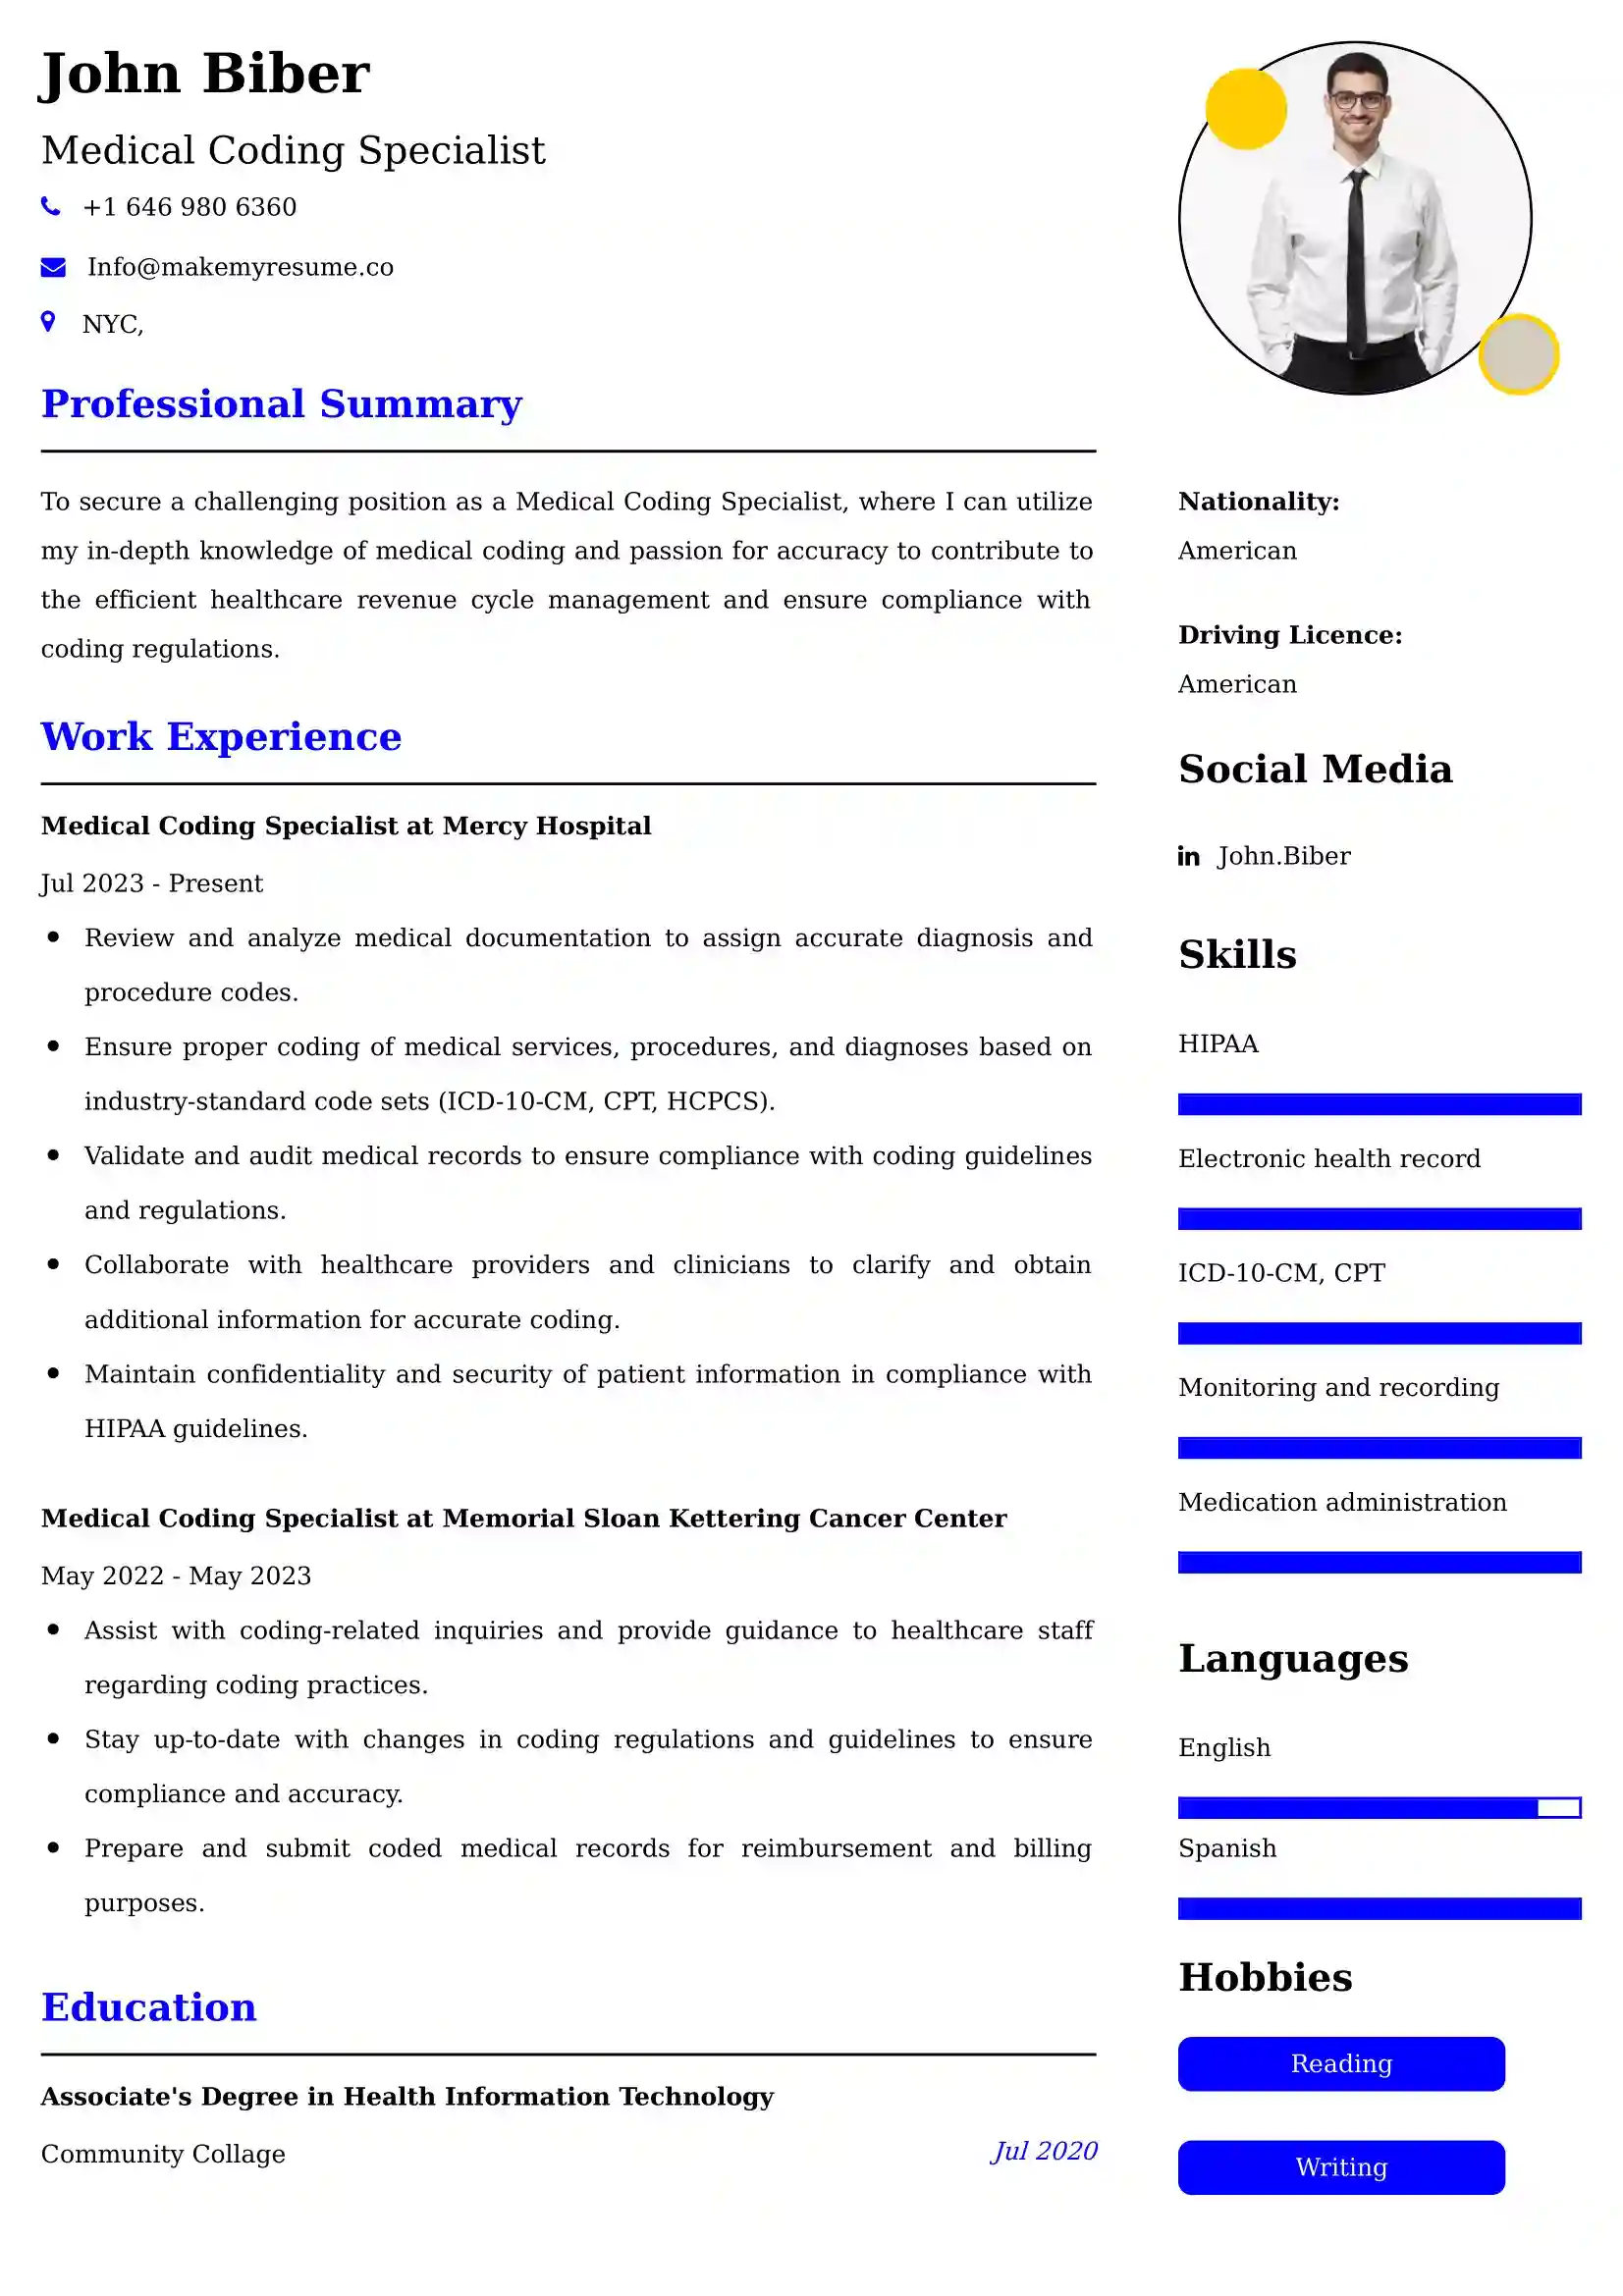 Medical Coding Specialist CV Examples Malaysia